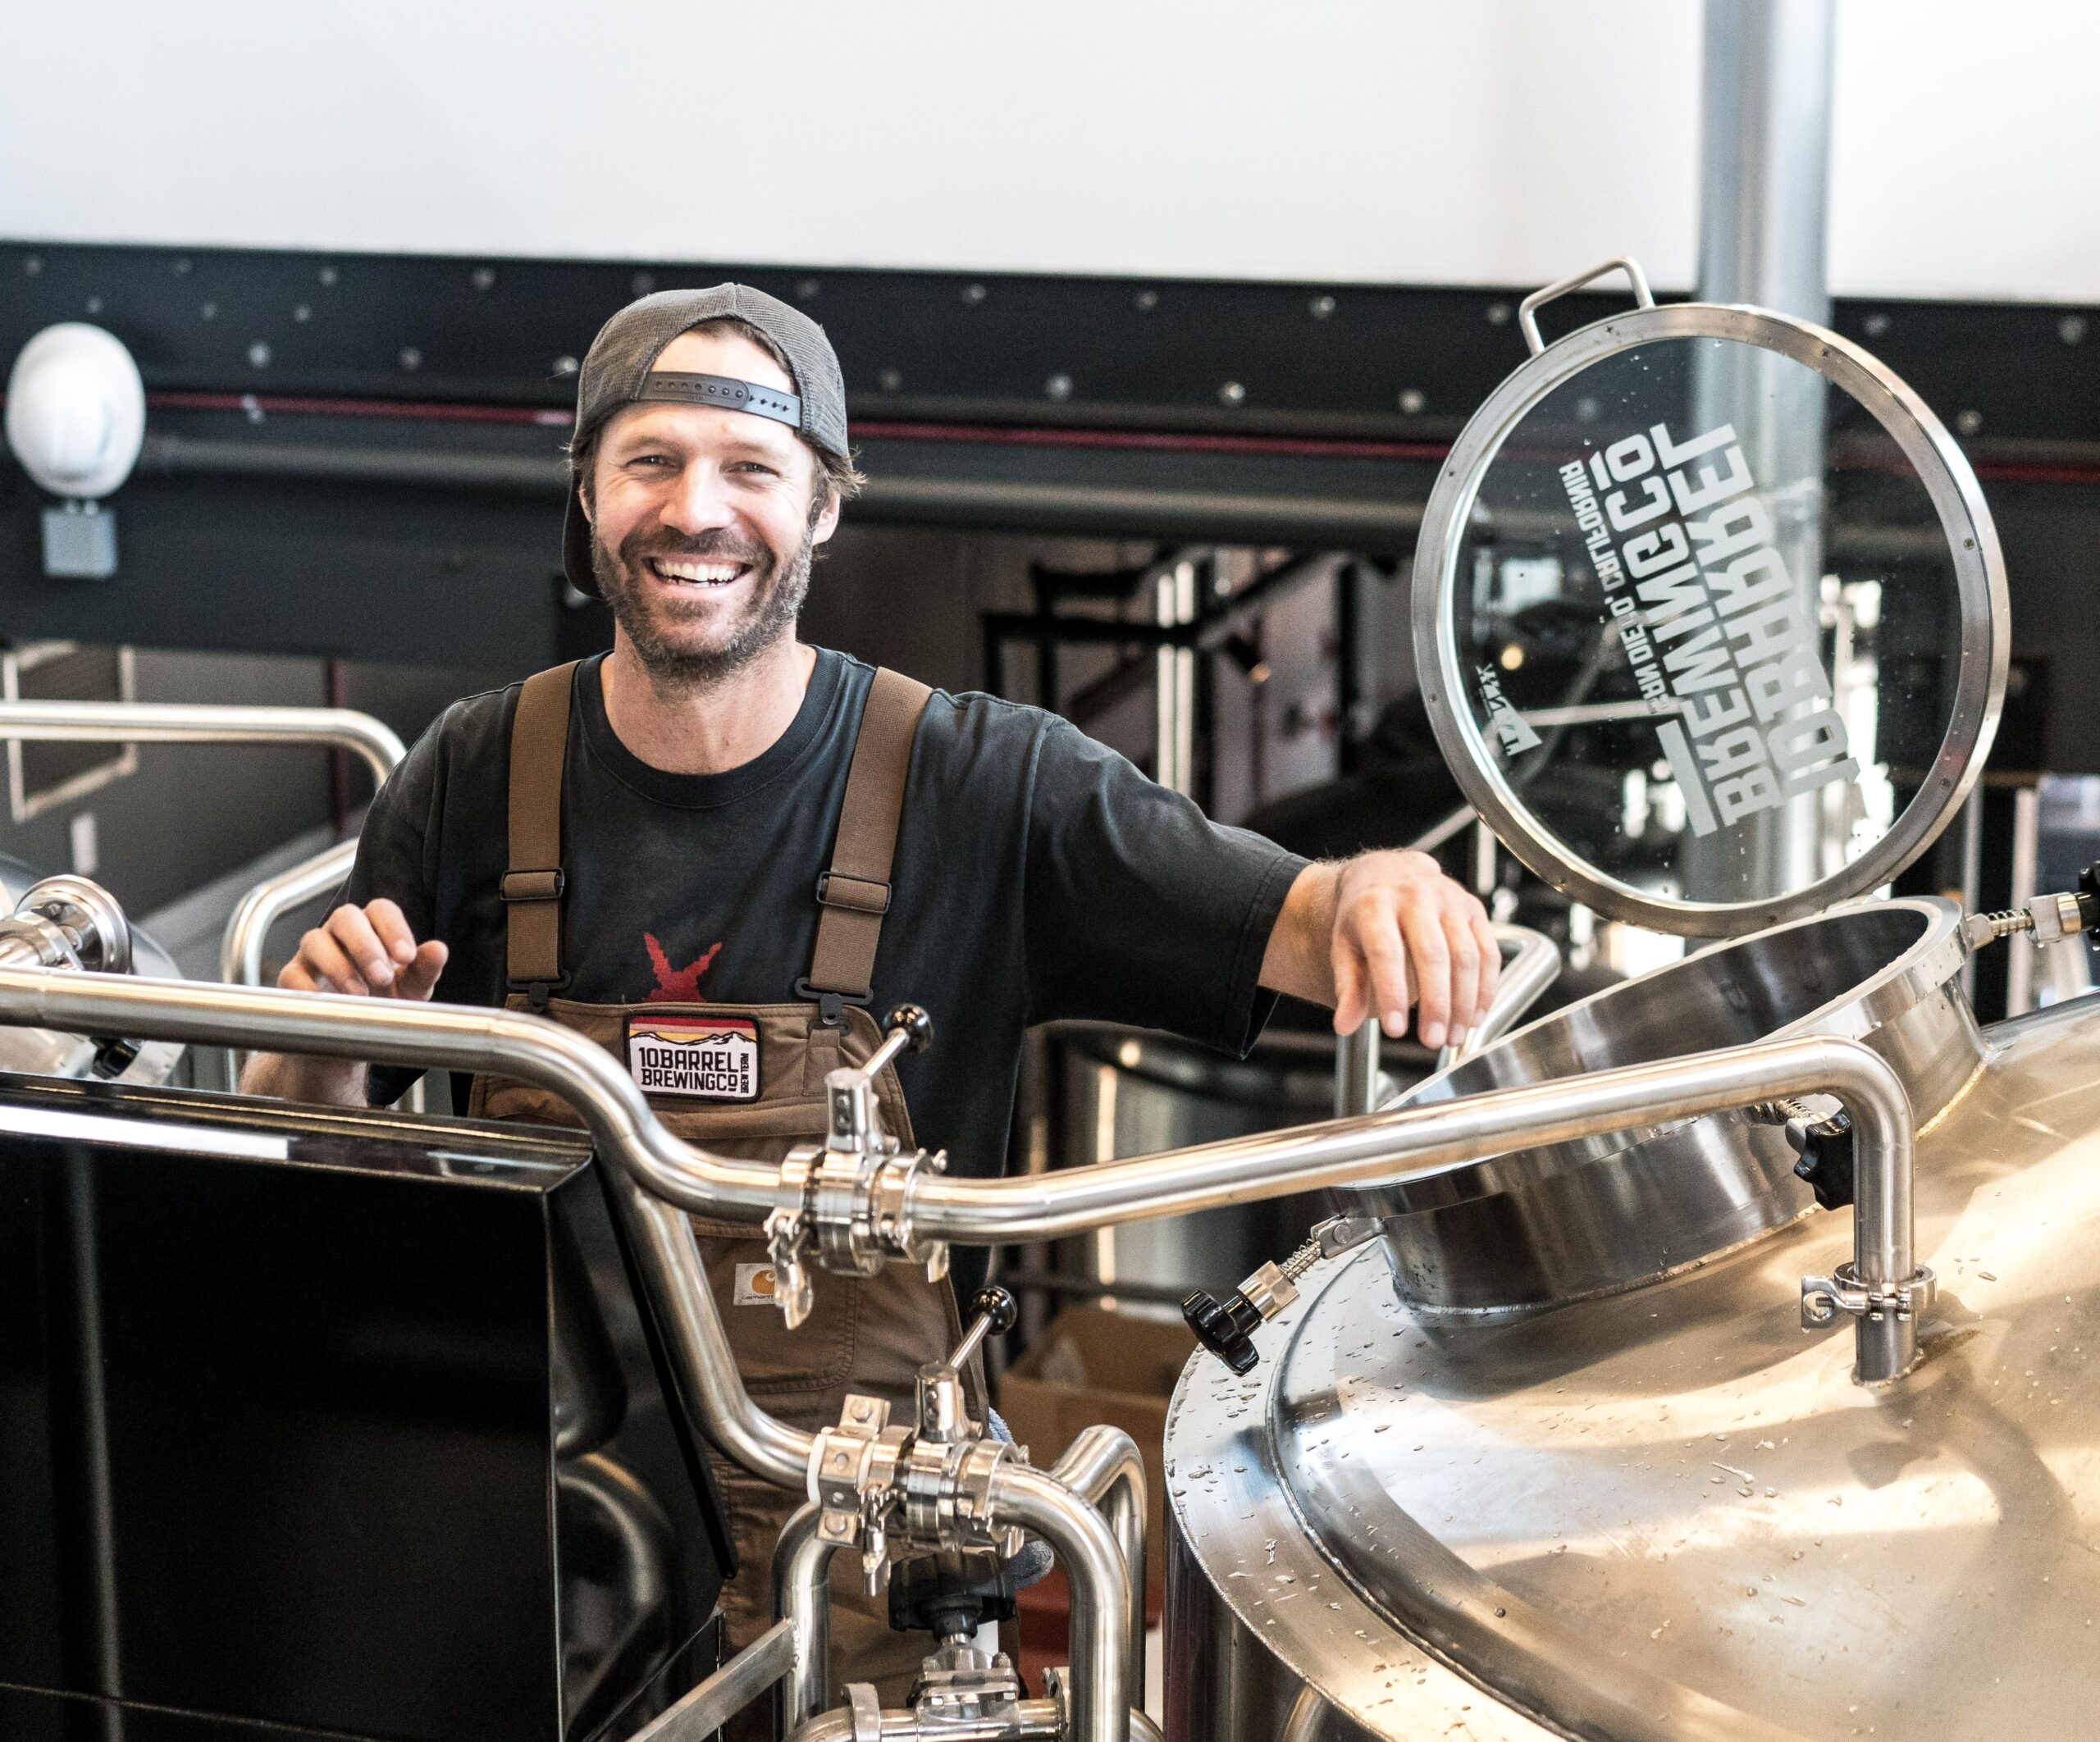 Man smiling standing behind brewing equipment